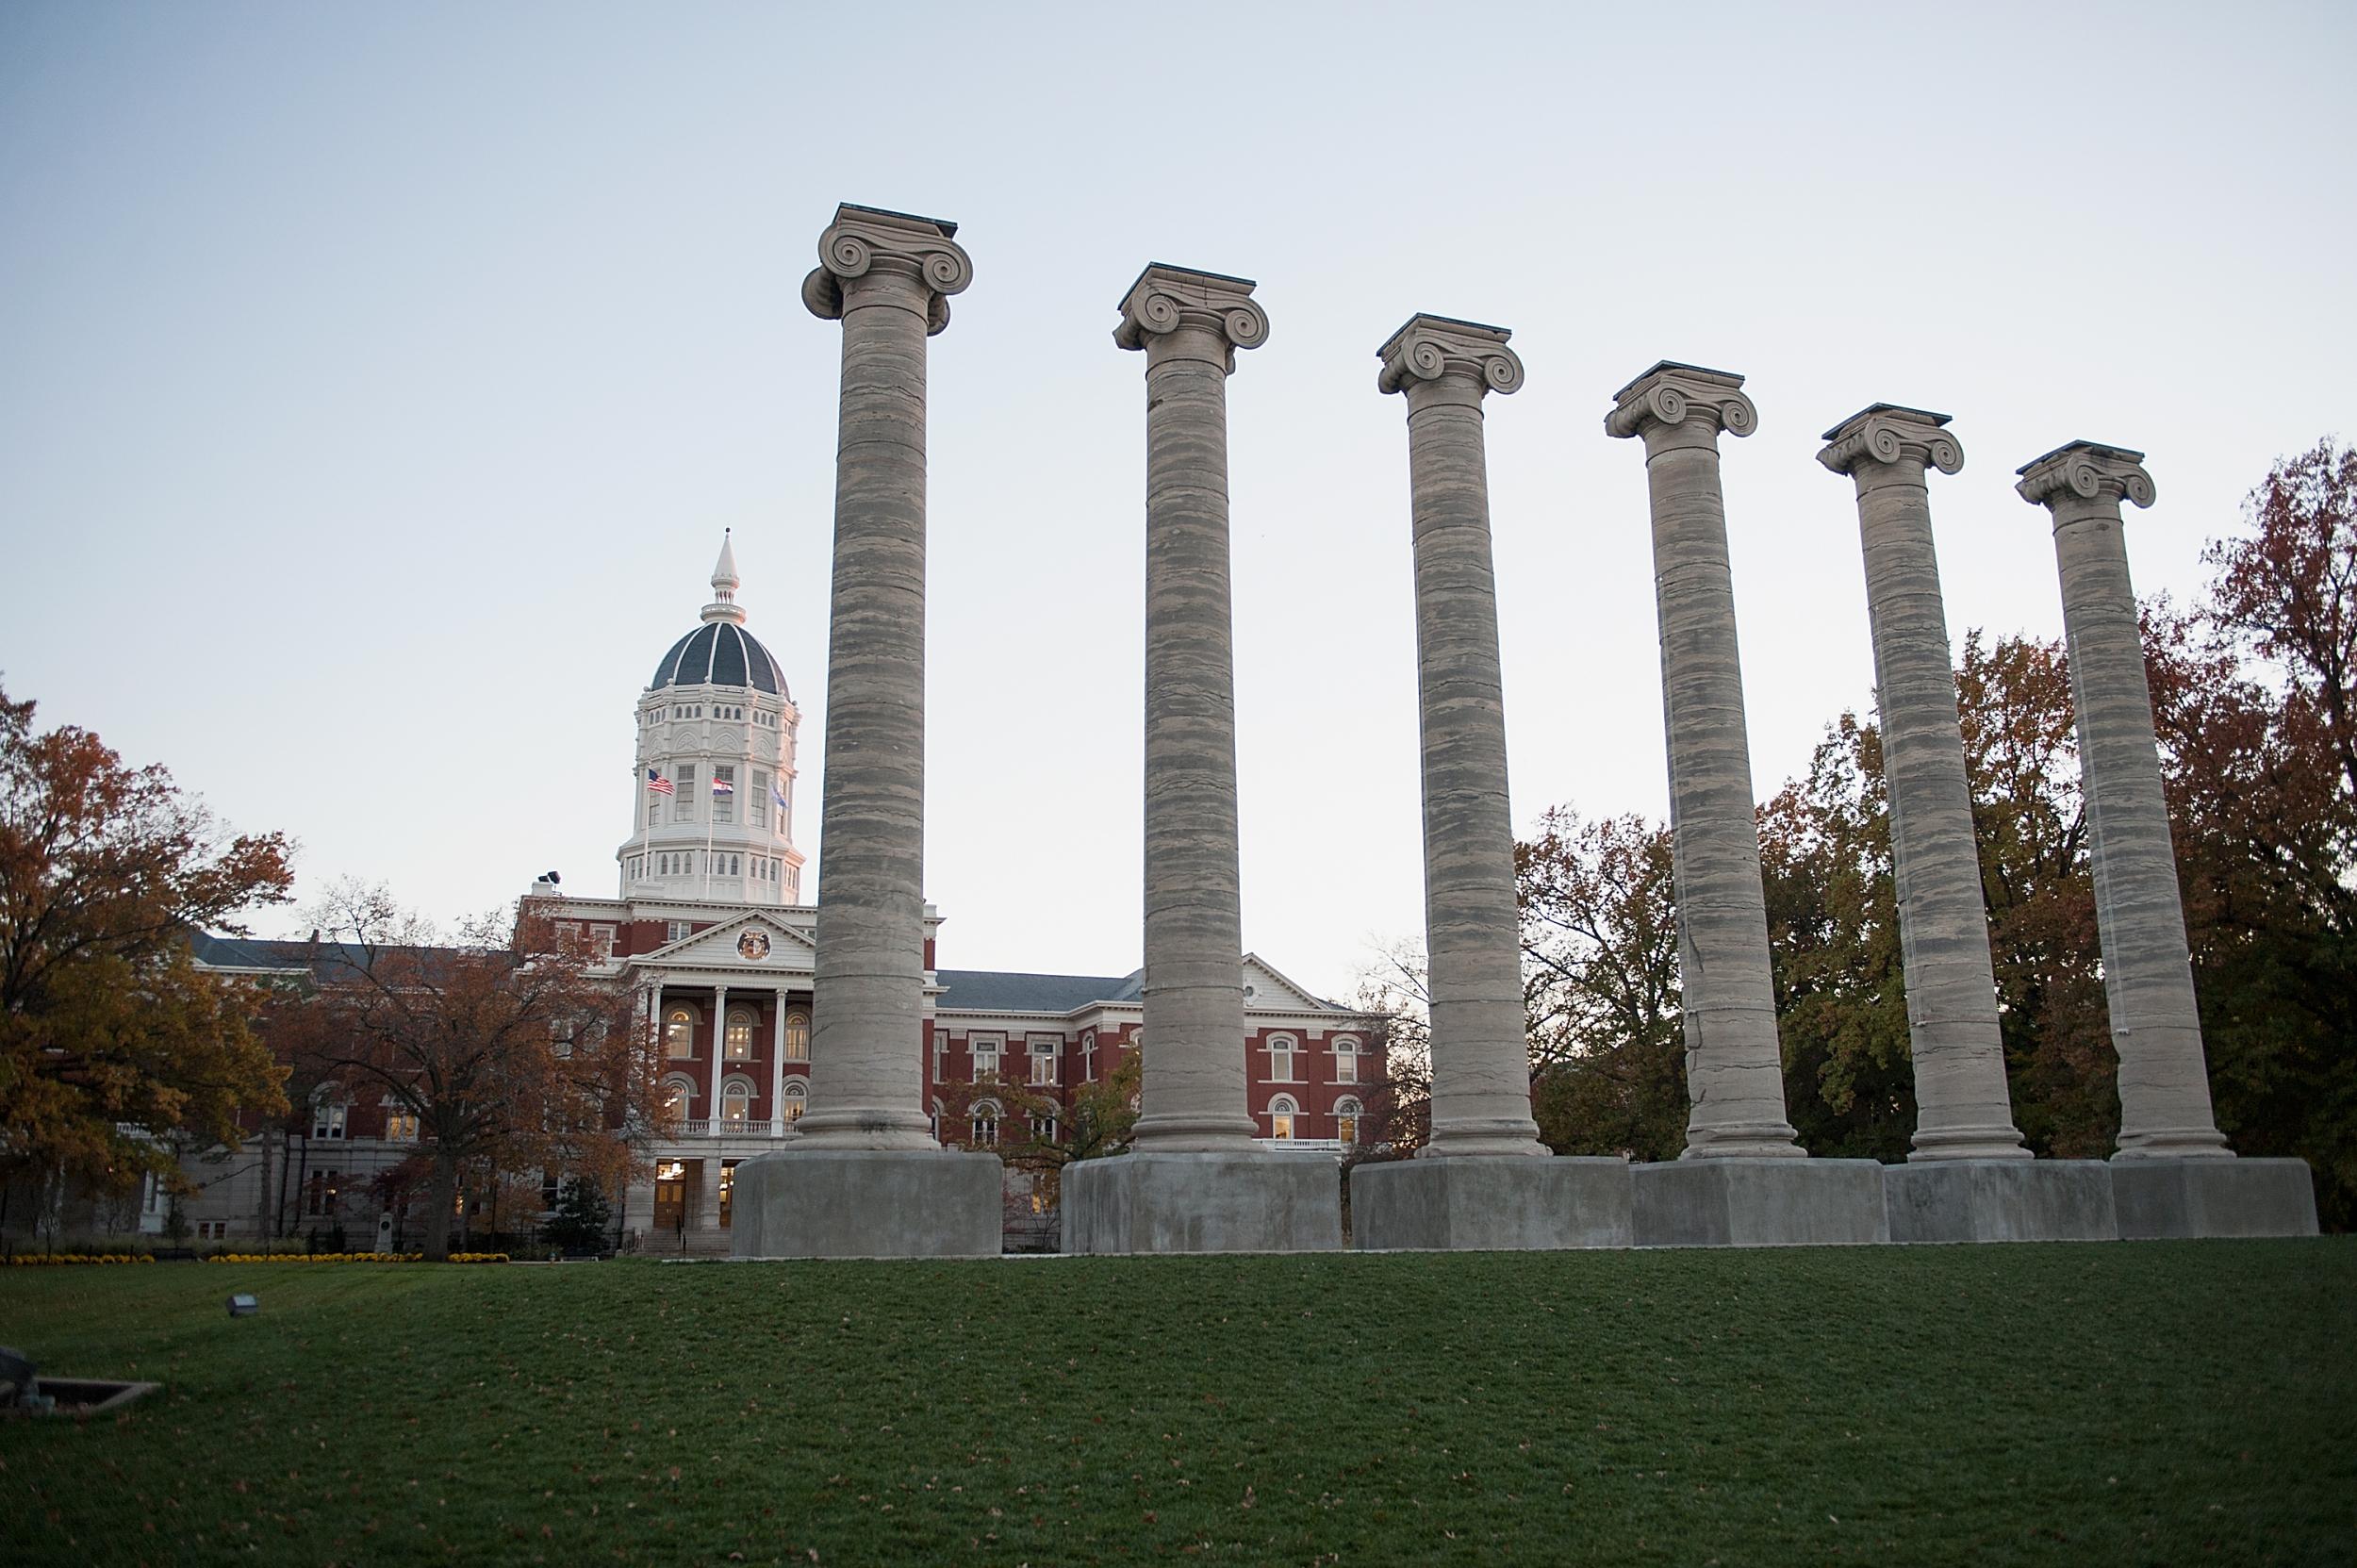 A woman was seen on the University of Missouri campus with a handgun